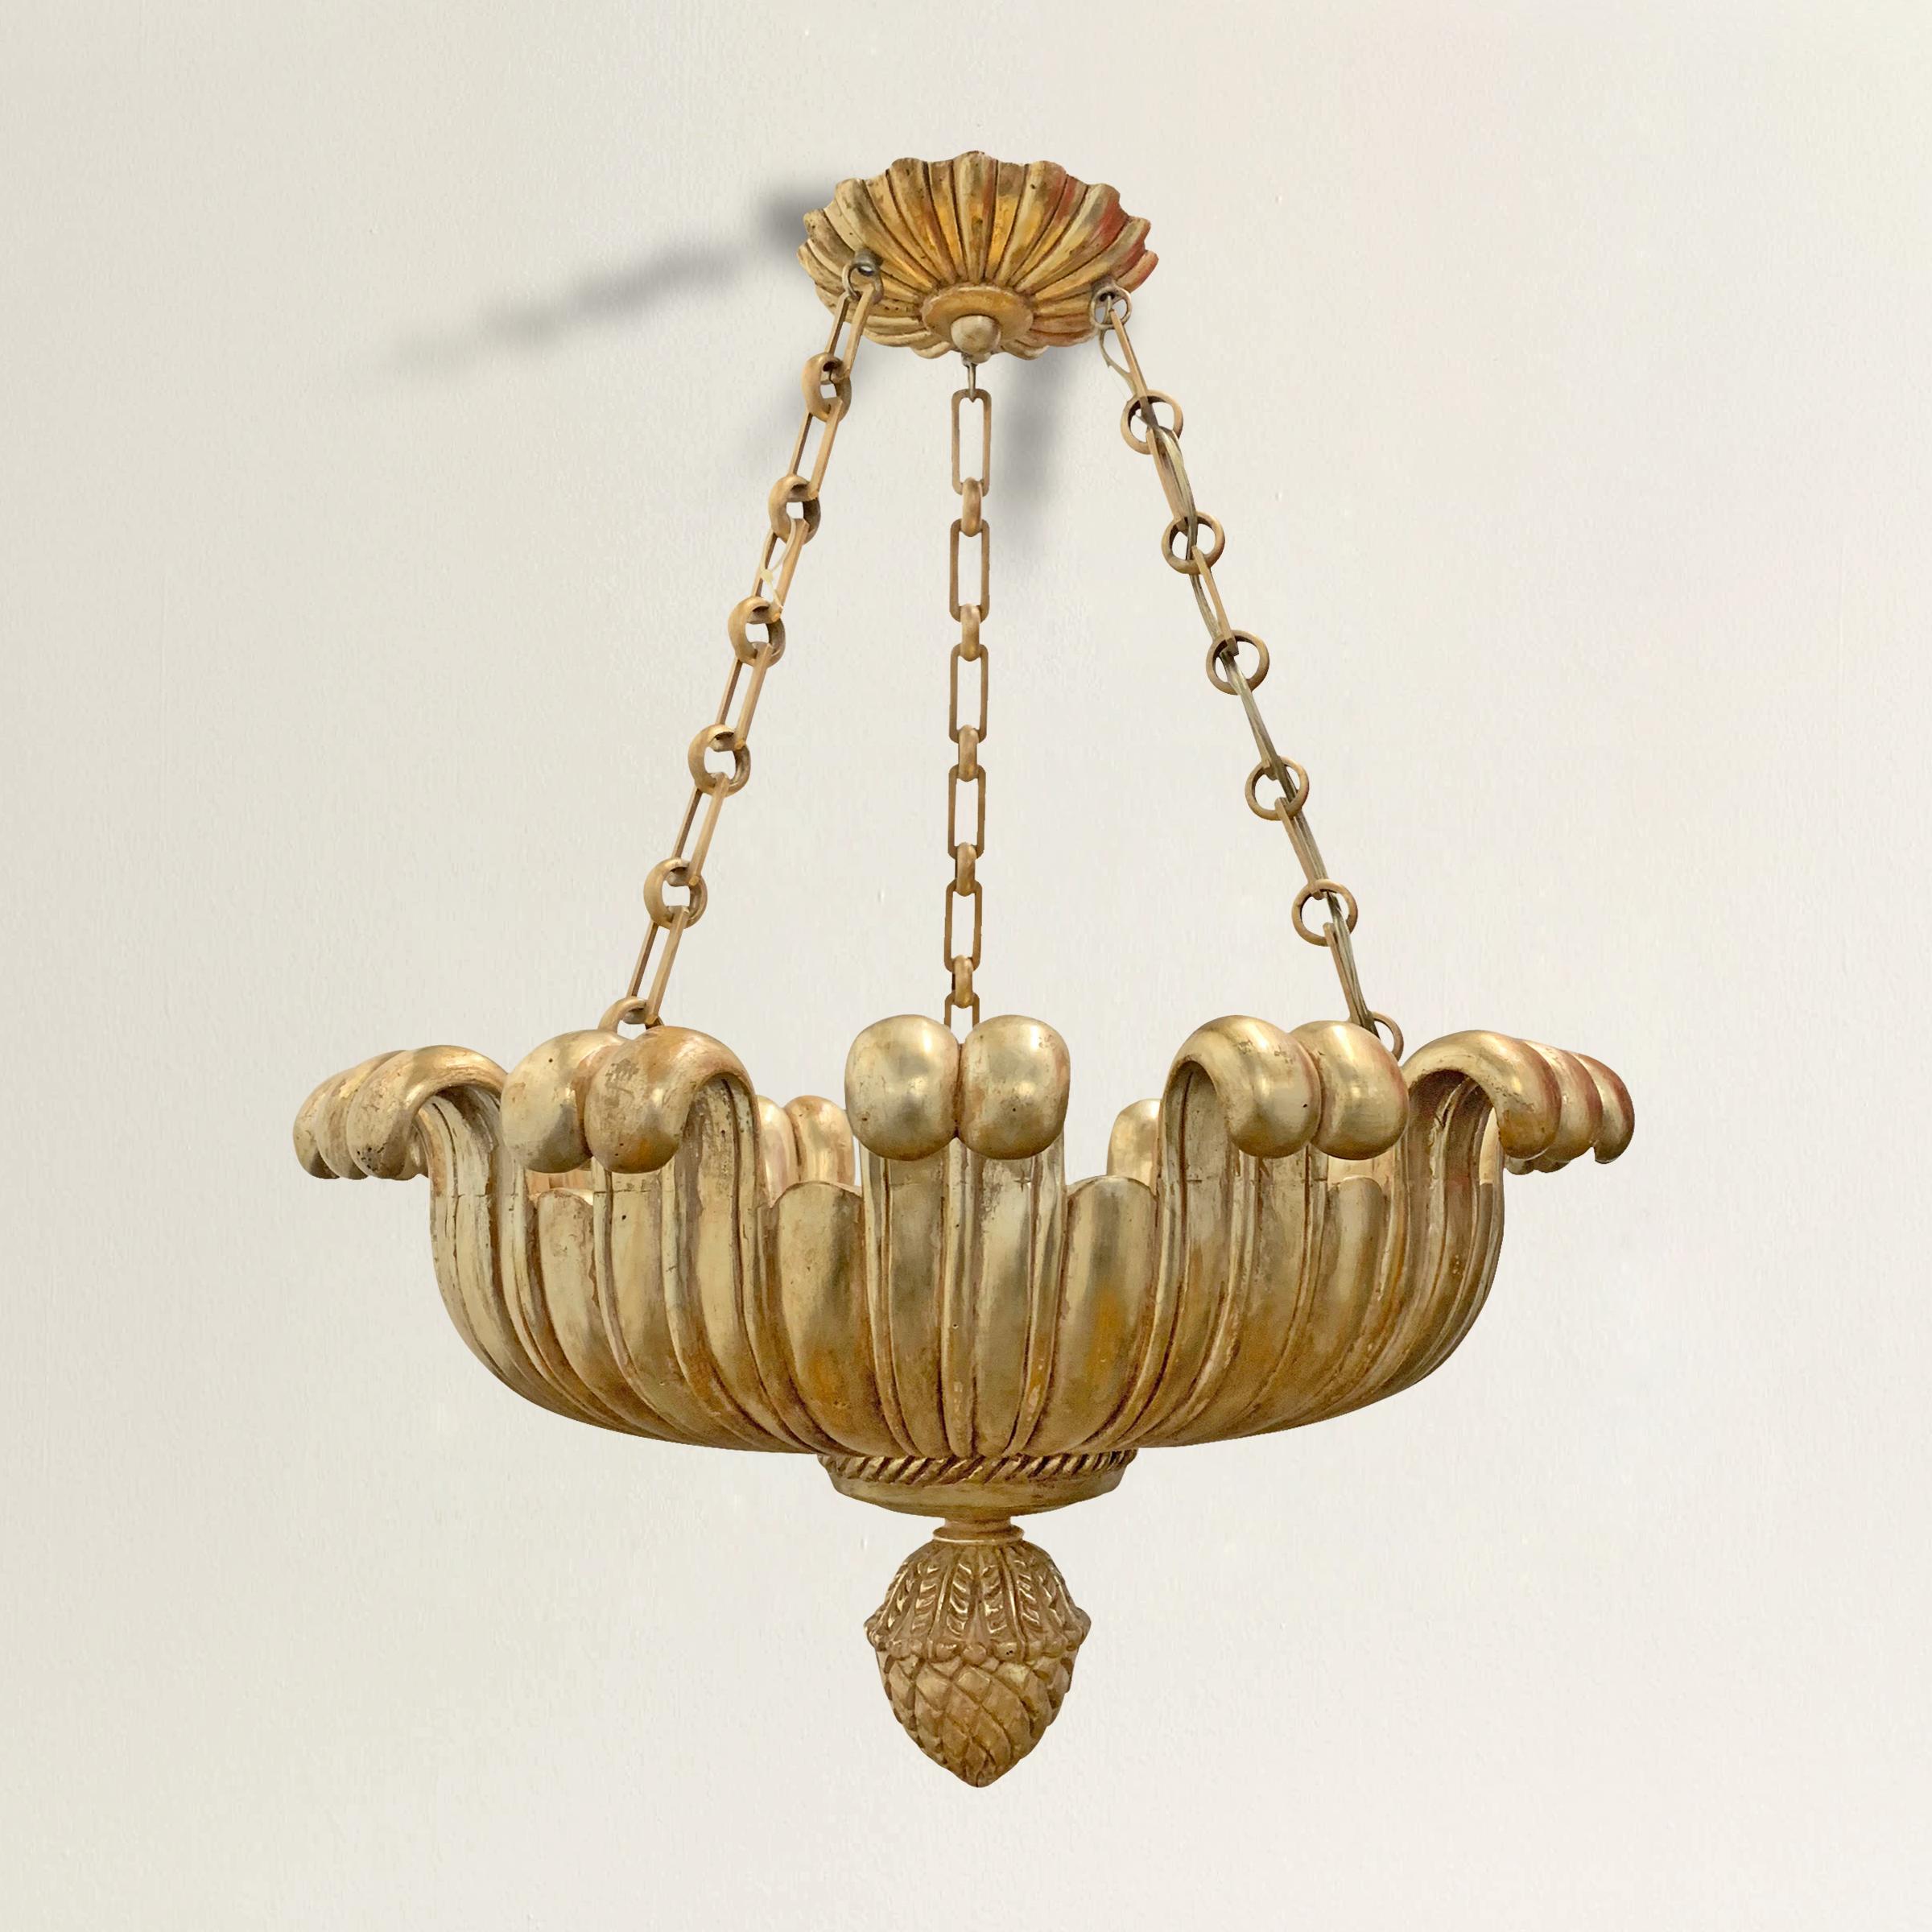 A wonderful contemporary Paul Ferrante carved wood single lotus chandelier with a white gold leaf over red clay finish, hanging from three iron chains and a floral canopy, and ending with a carved wood pineapple finial. The interior has three